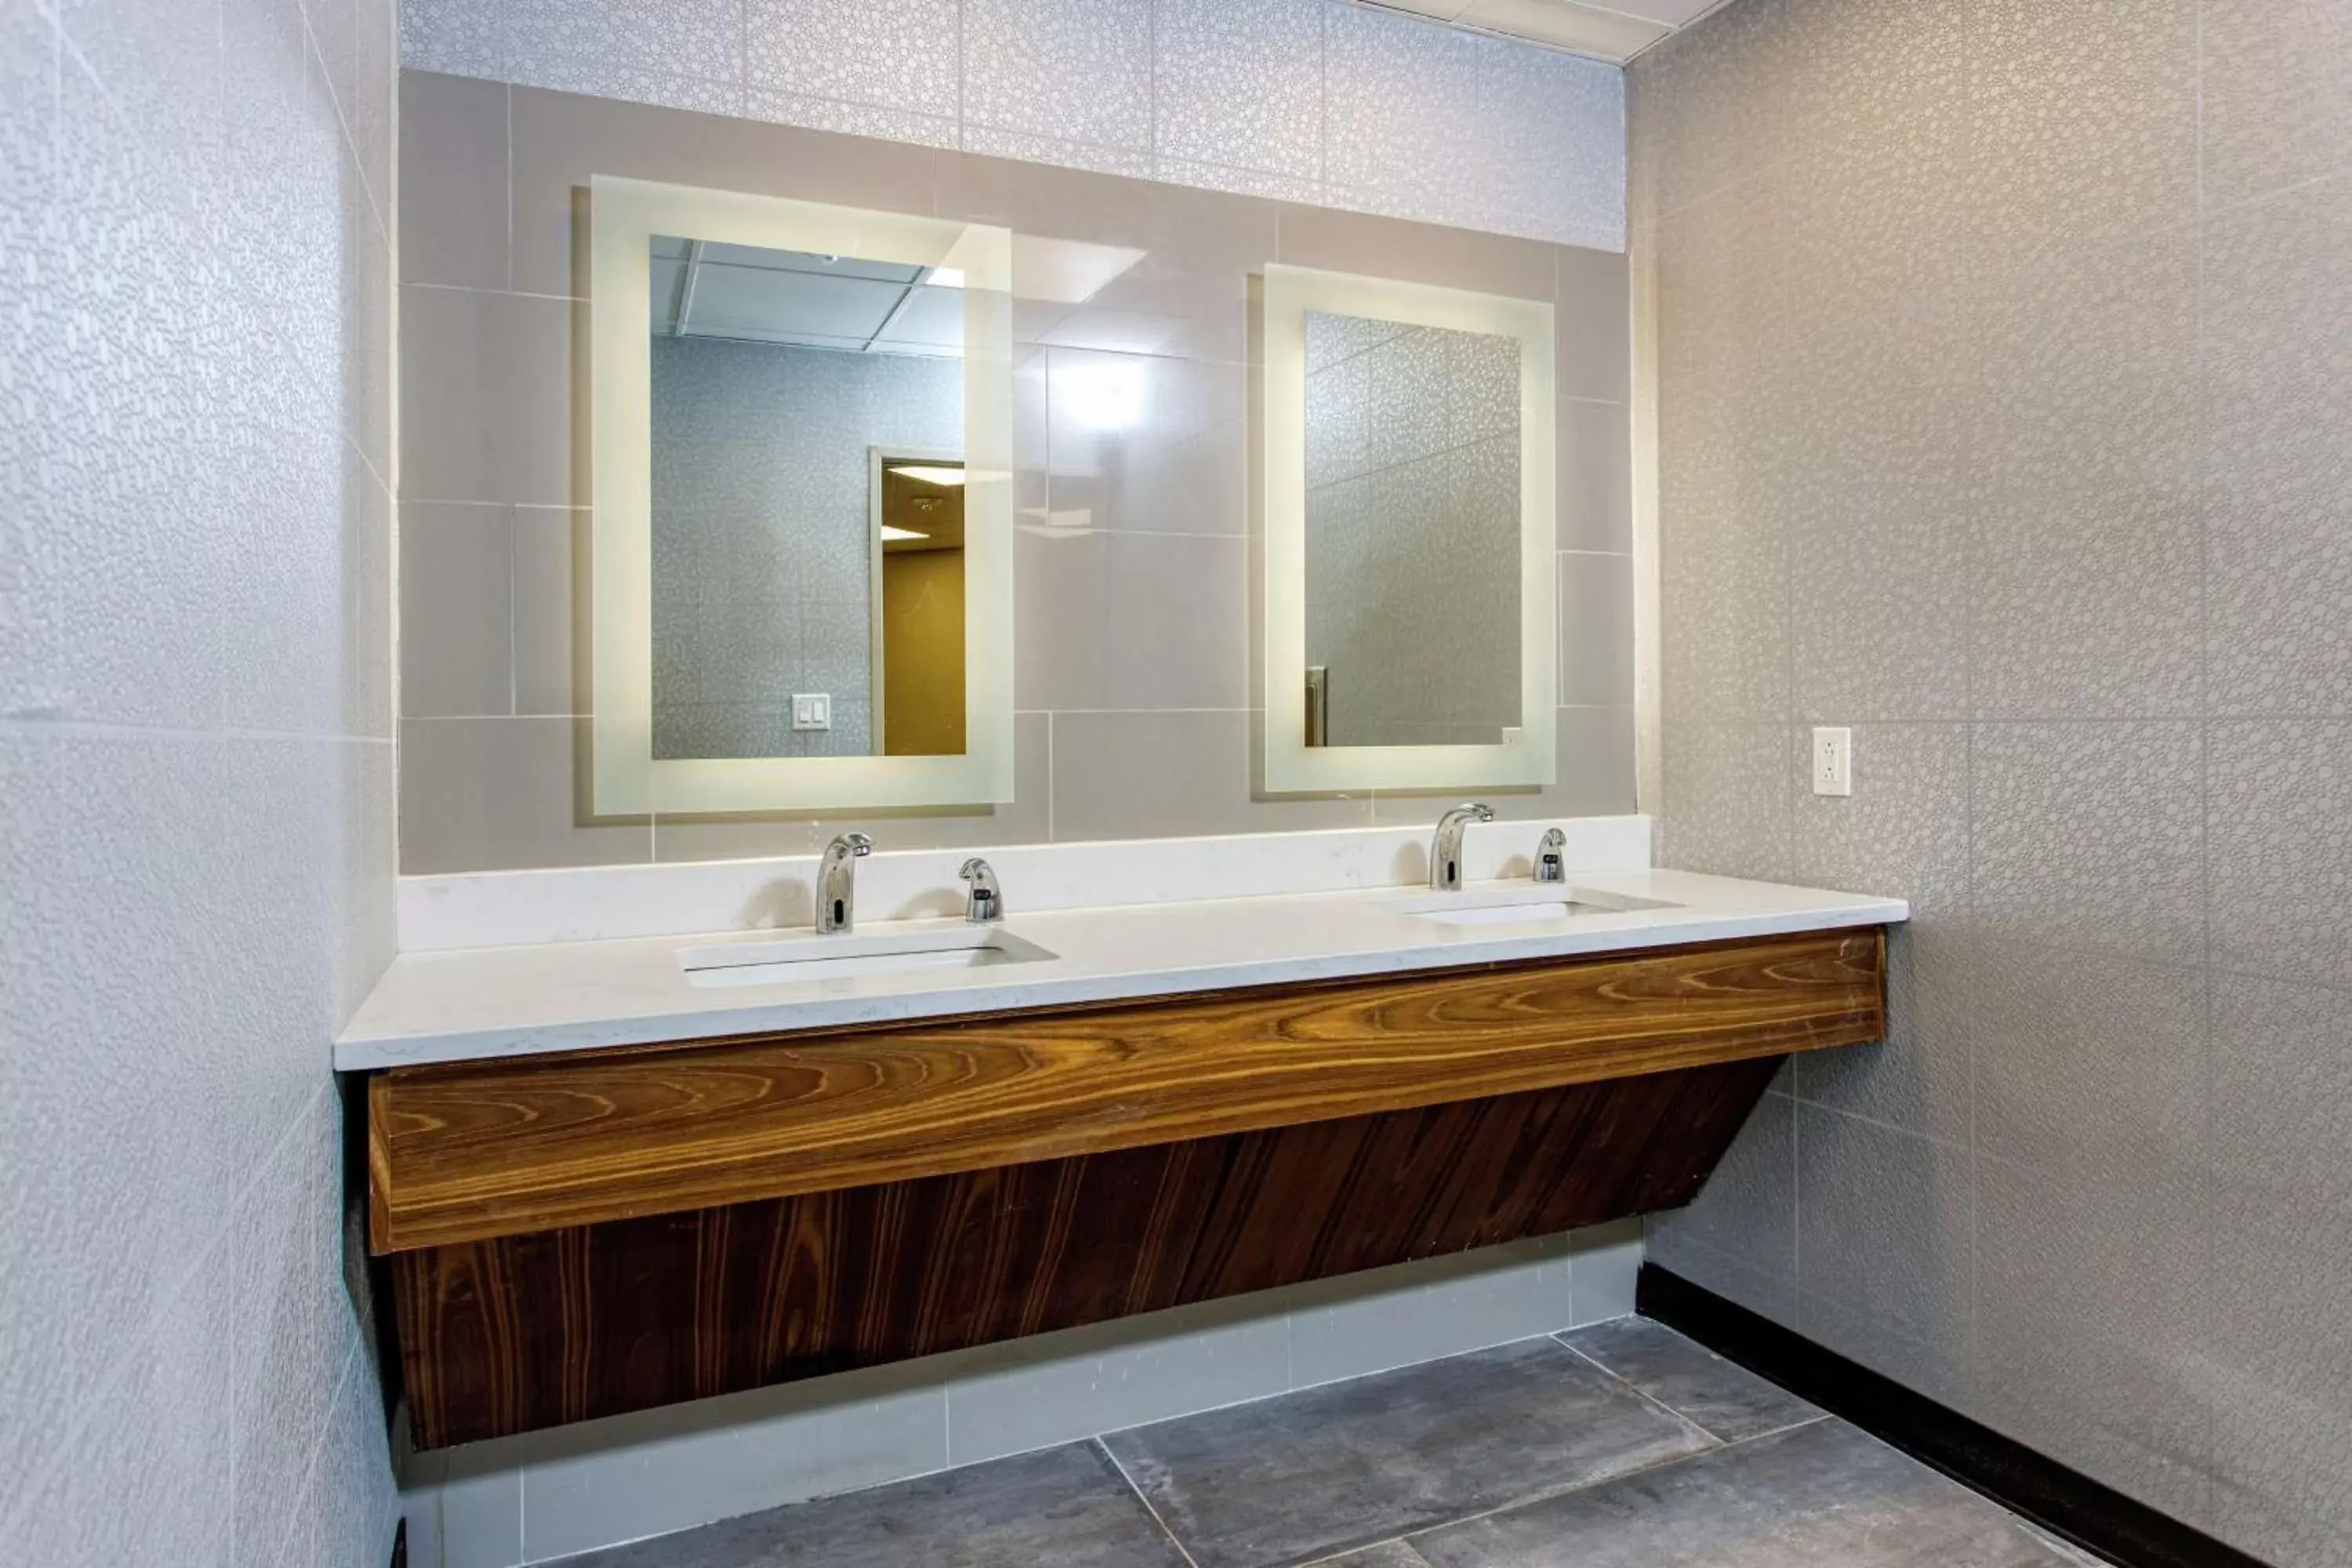 Meeting/conference room, Bathroom in DoubleTree by Hilton Appleton, WI